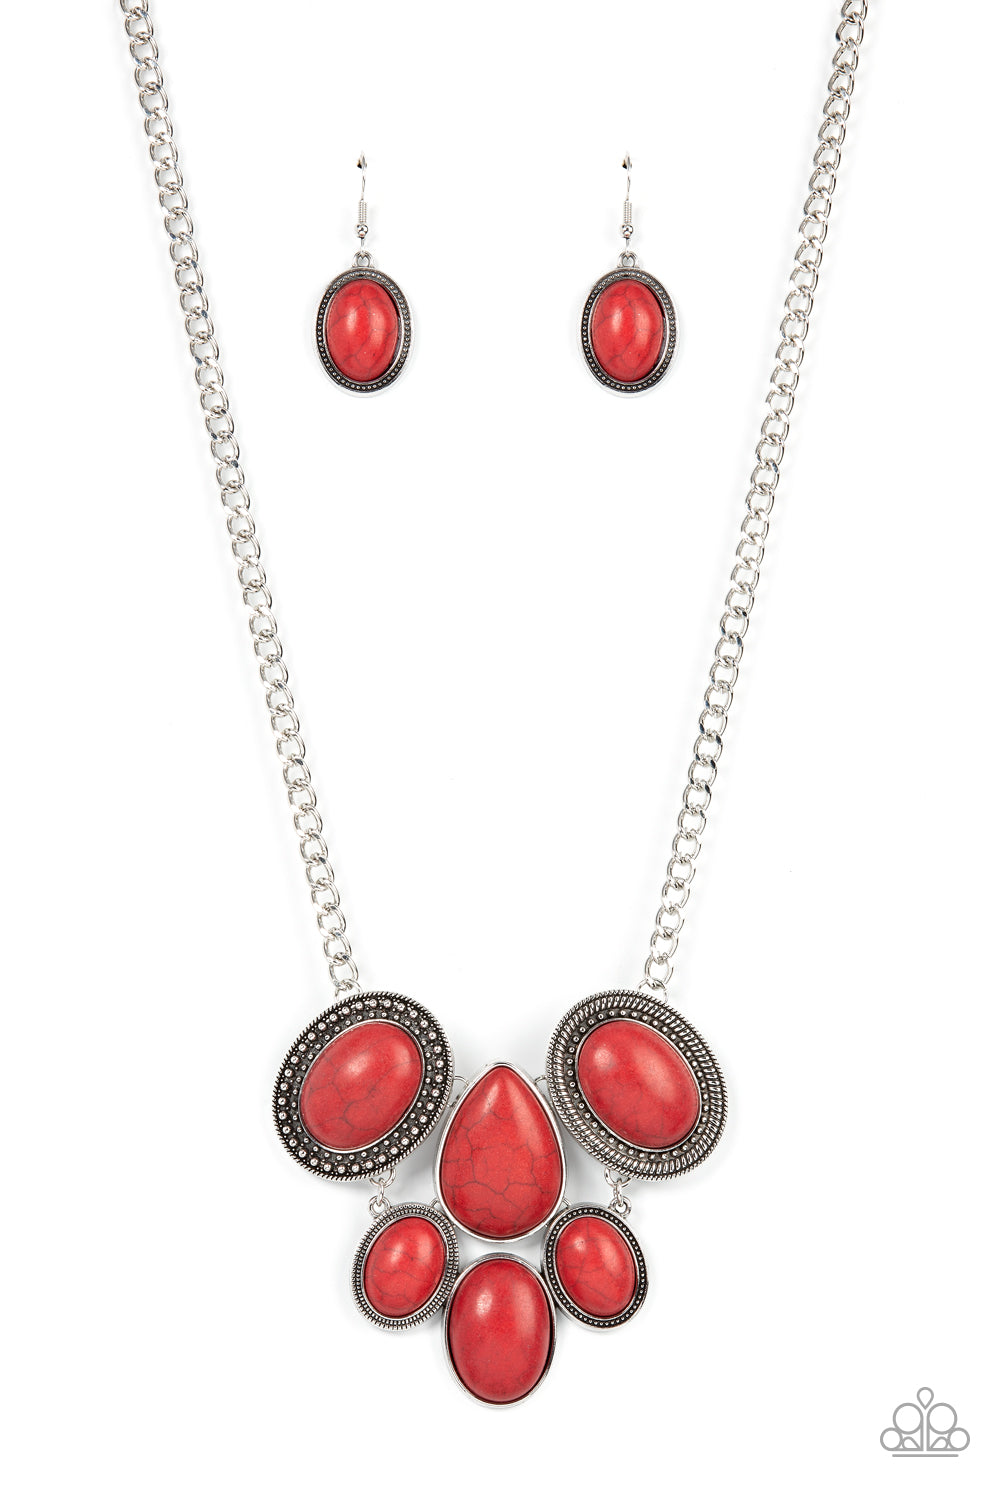 All-Natural Nostalgia - Red Paparazzi Necklace